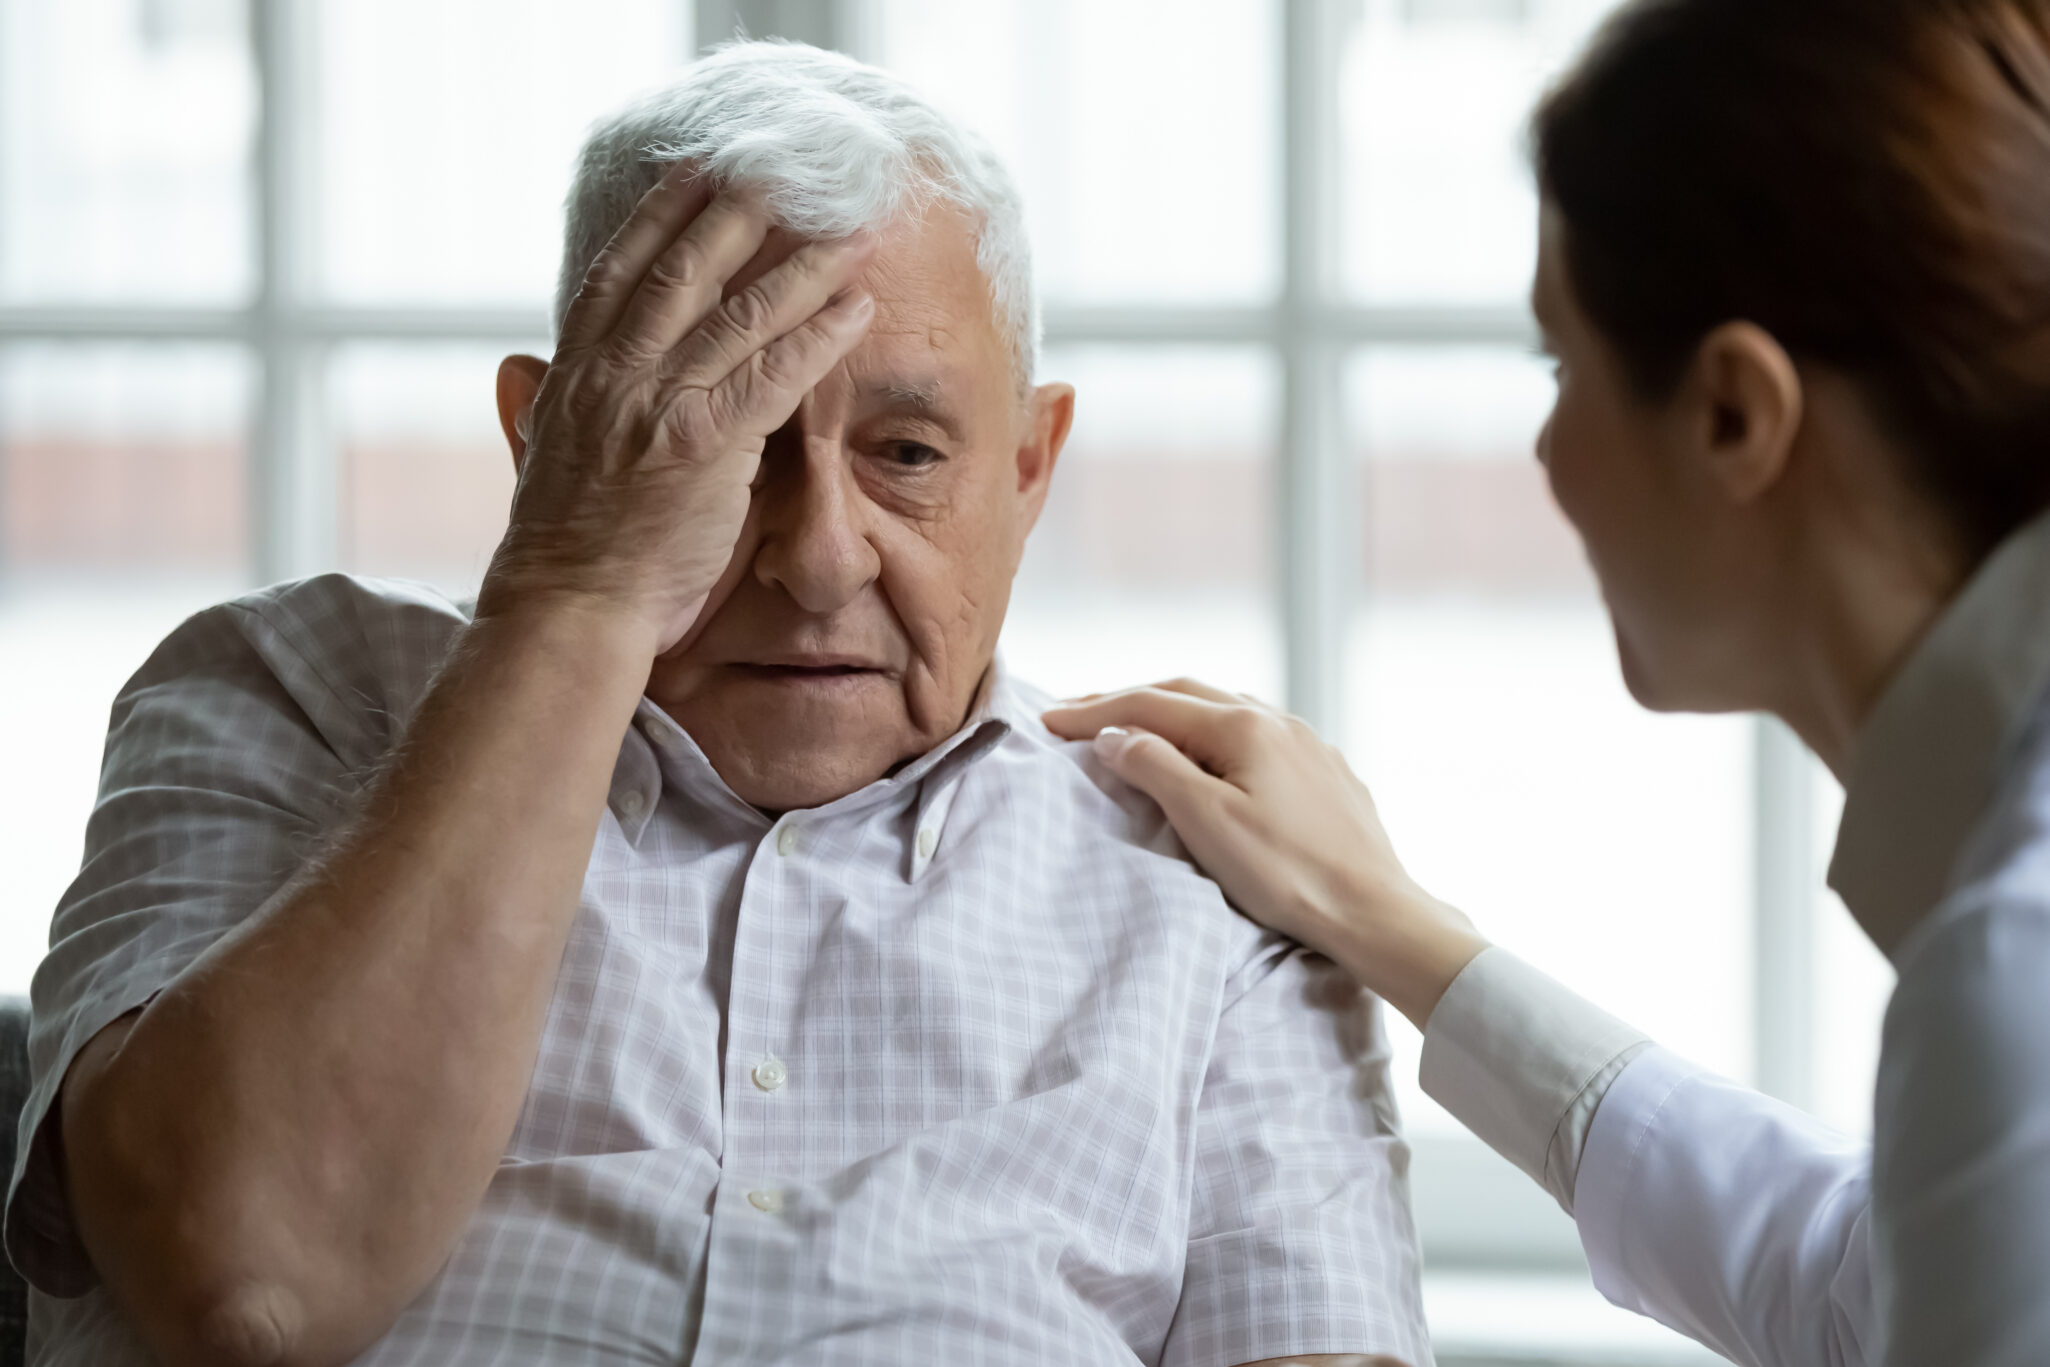 Senior man stressed and confused while doctor attends to him